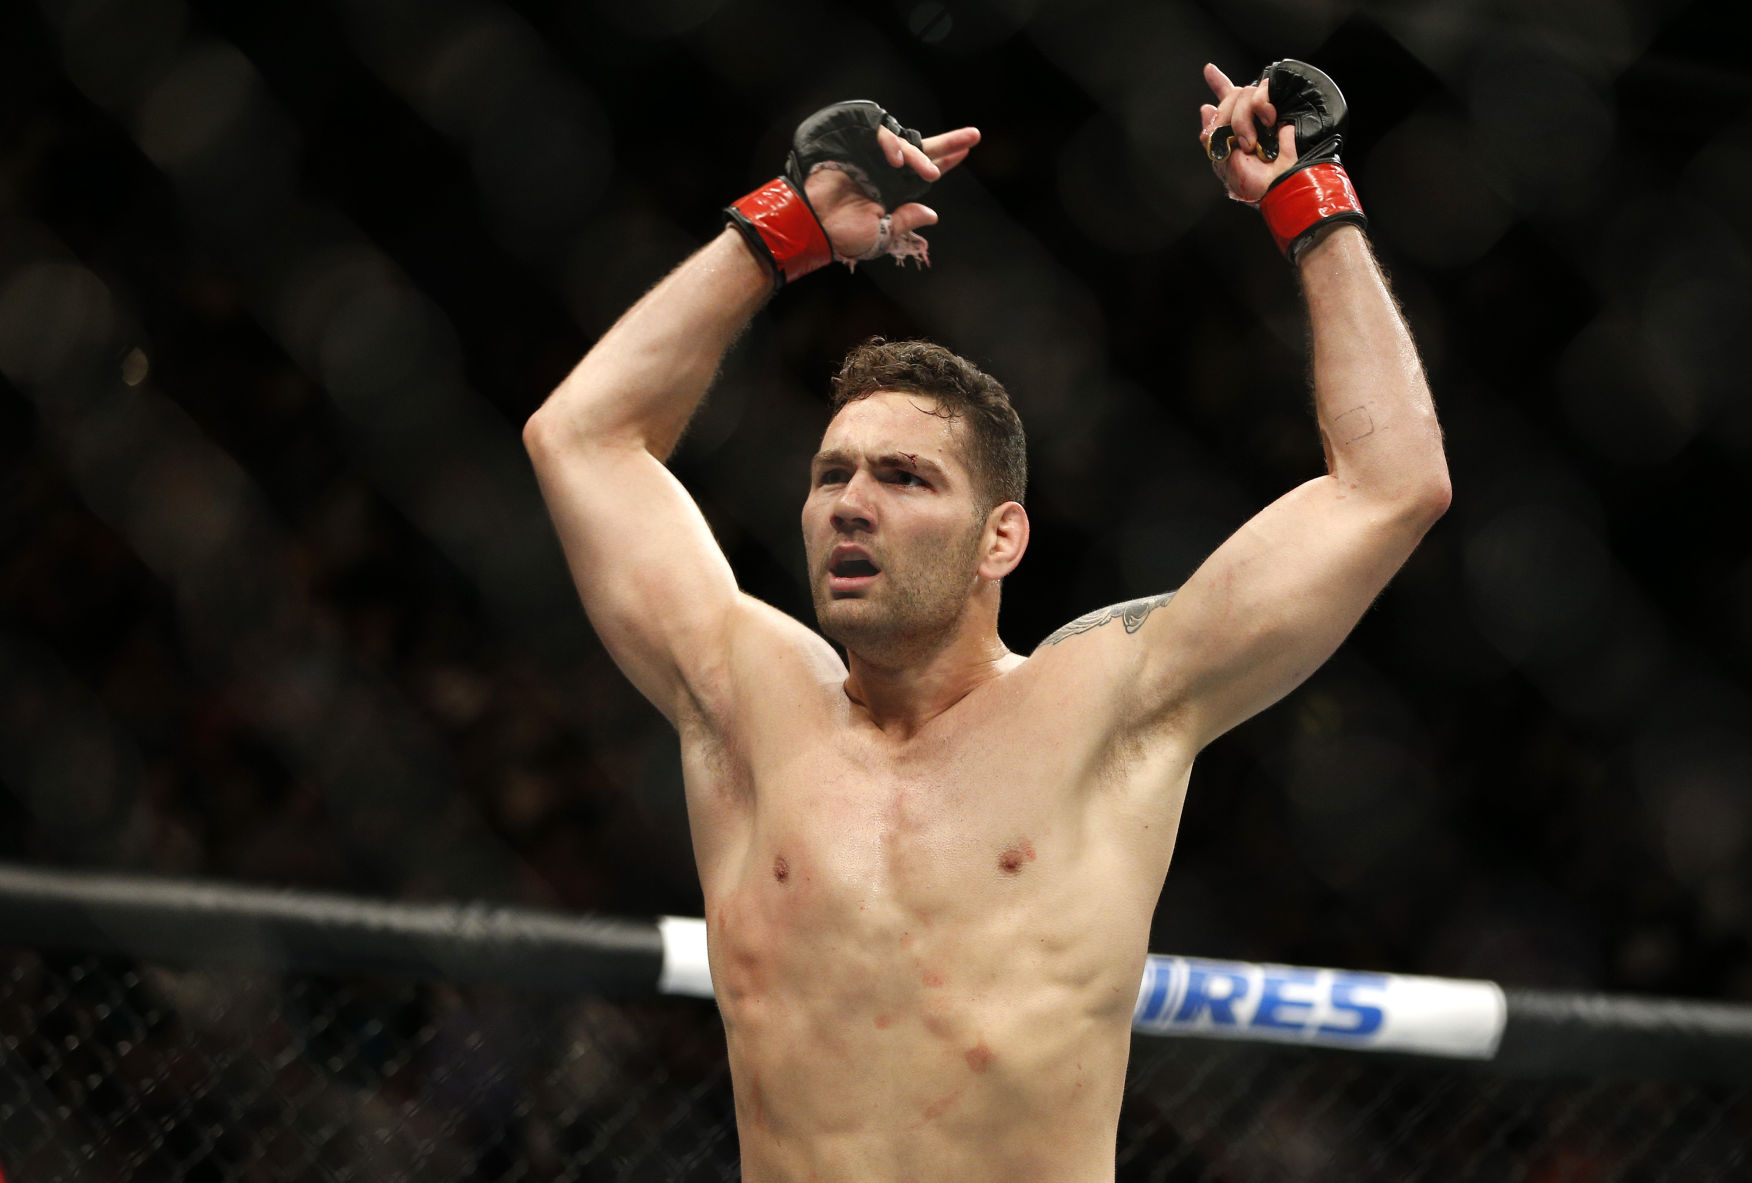 Chris Weidman gets another home state fight at UFC 210 in Buffalo